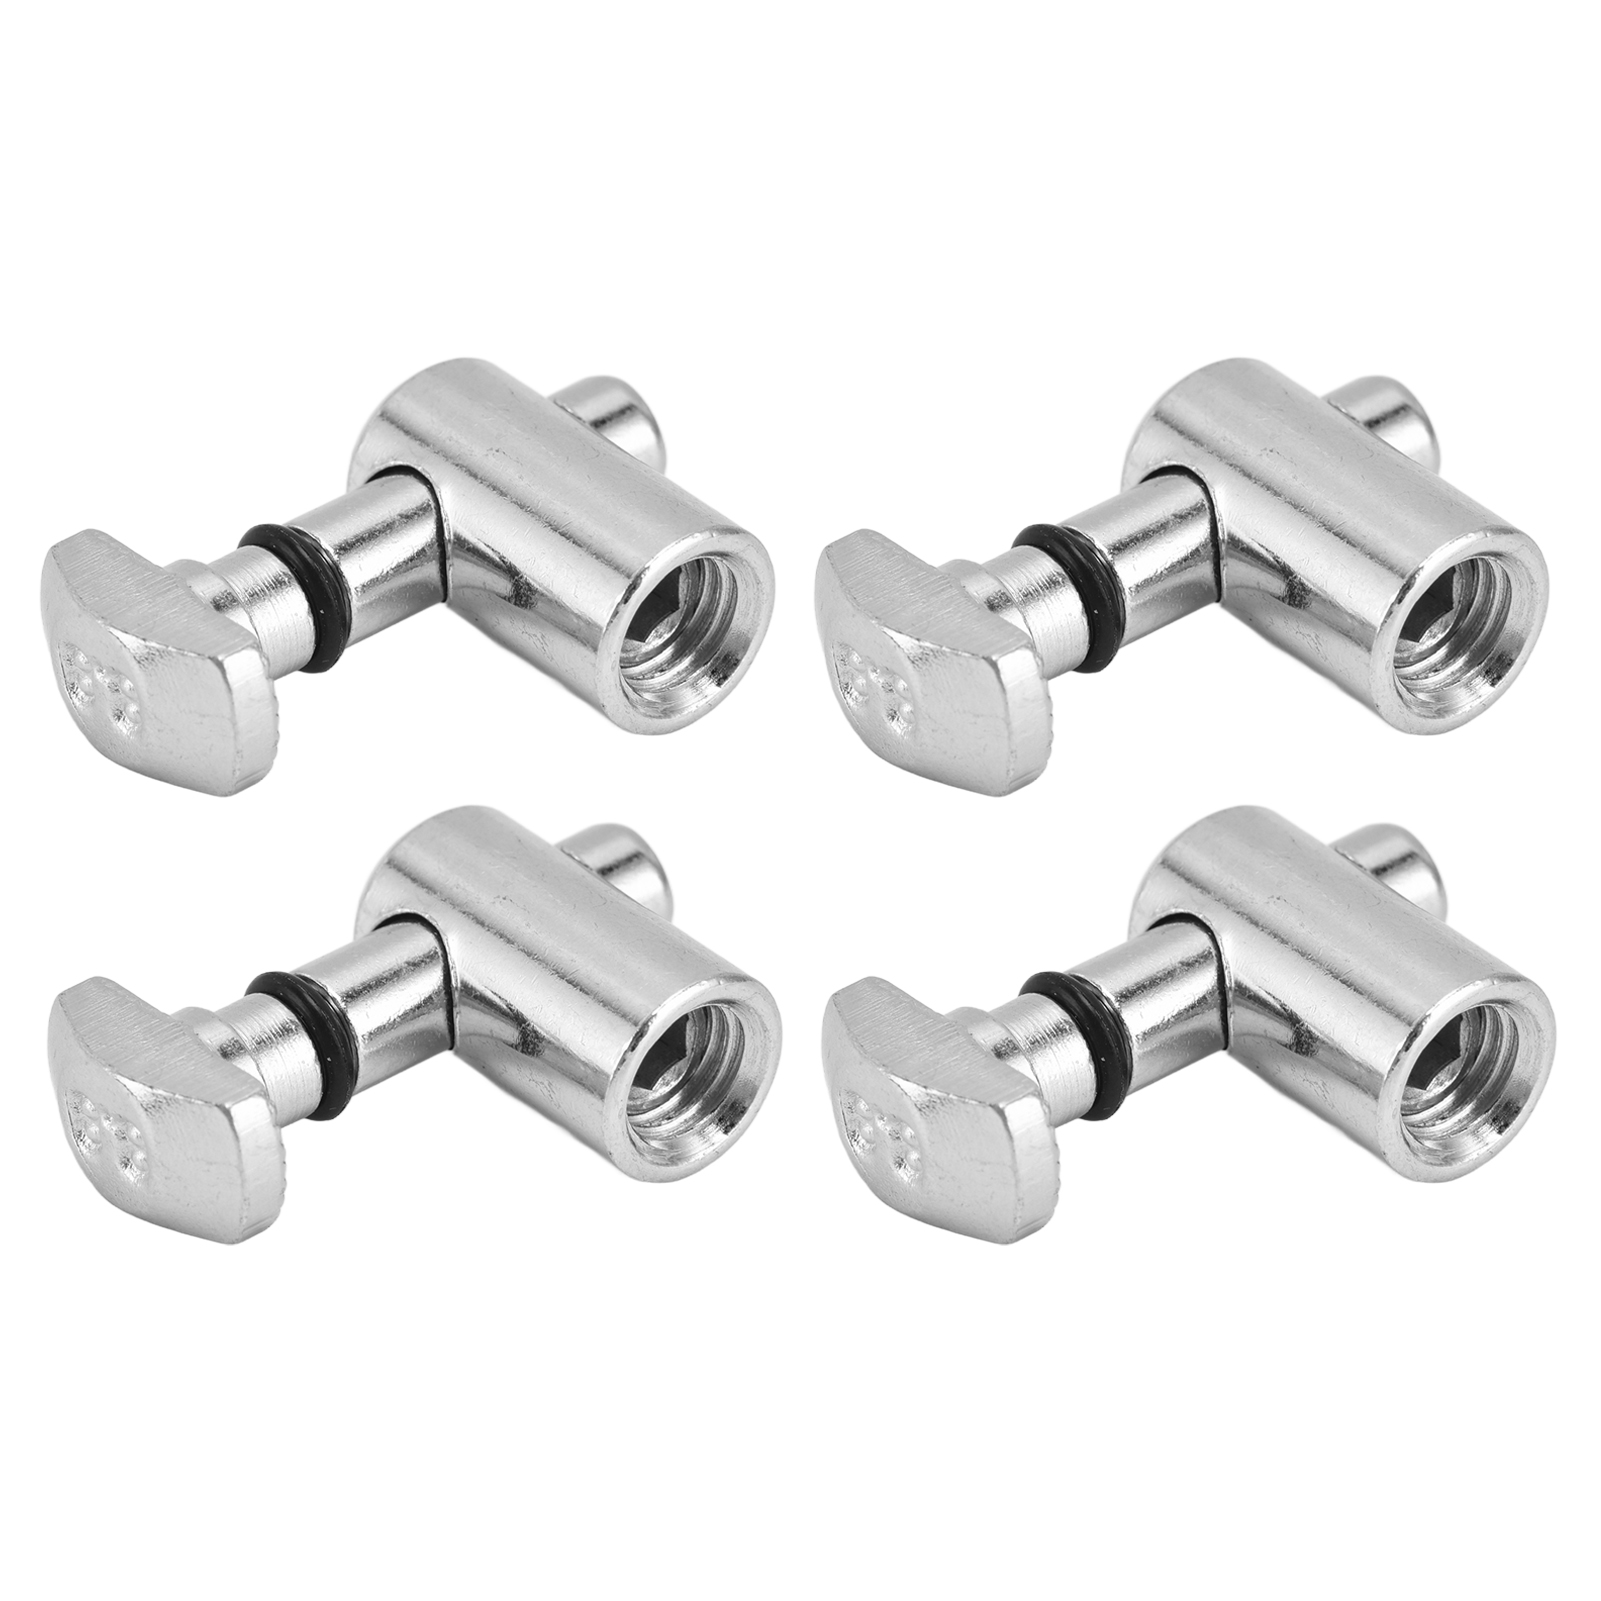 Anchor Type Connector, 4Pcs Tight Seamless Connections Slot Connectors For  Walmart Canada